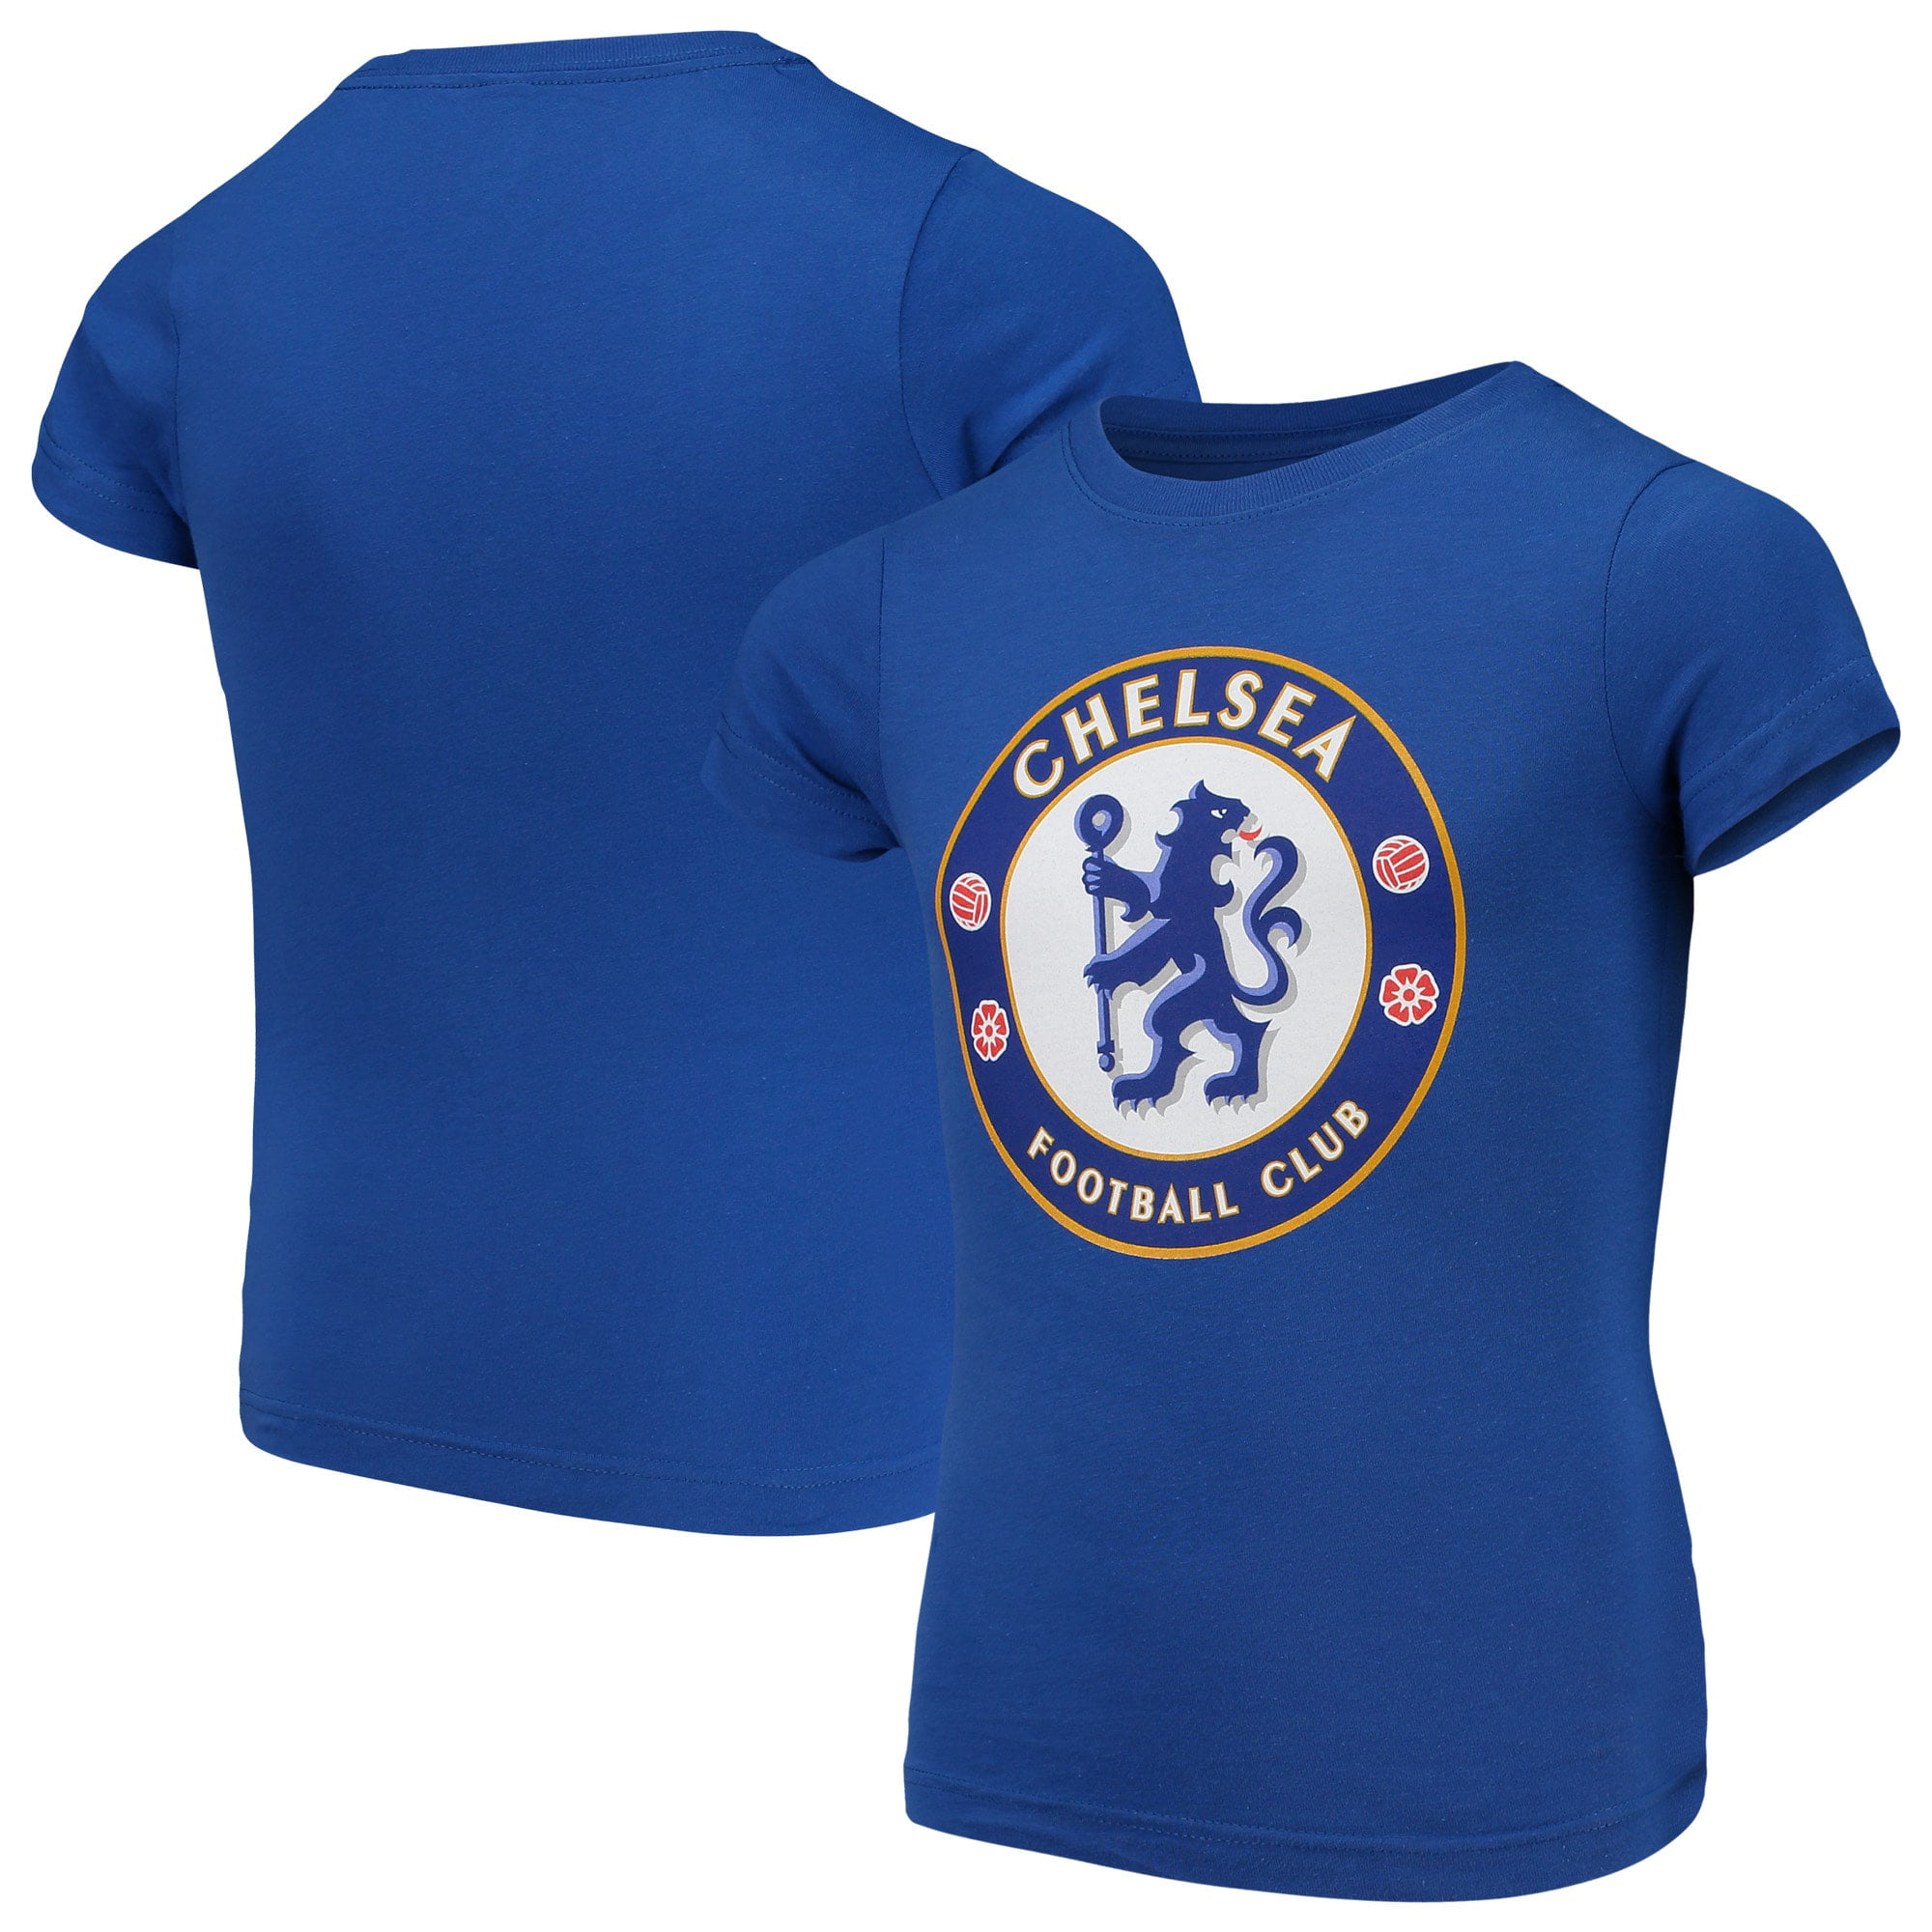 Chelsea Youth Football Club Royal Blue T-Shirt Official 